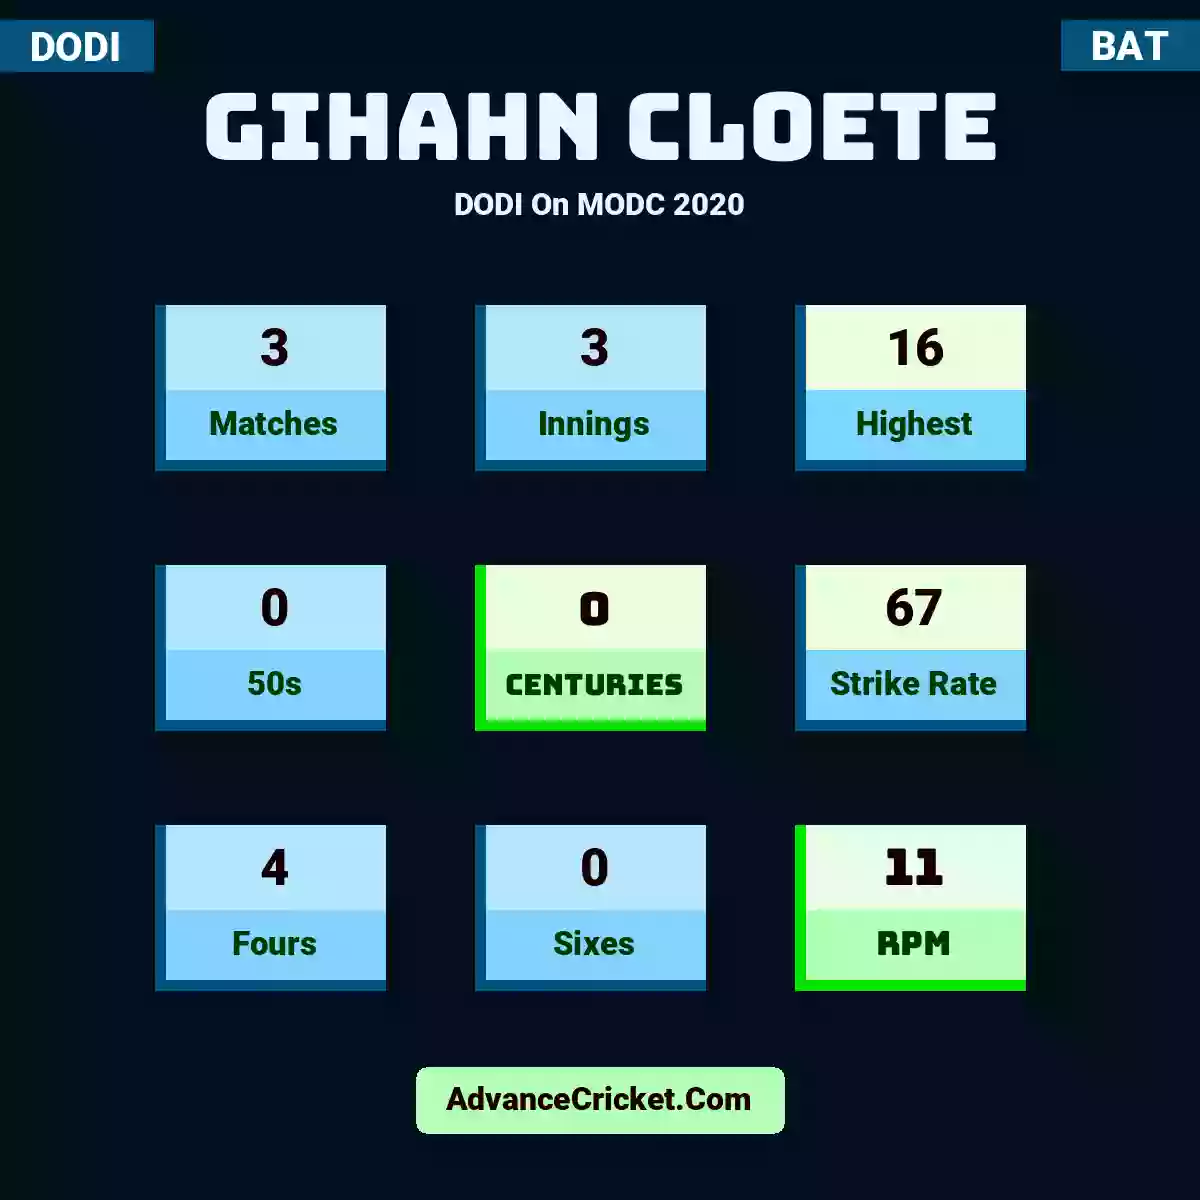 Gihahn Cloete DODI  On MODC 2020, Gihahn Cloete played 3 matches, scored 16 runs as highest, 0 half-centuries, and 0 centuries, with a strike rate of 67. G.Cloete hit 4 fours and 0 sixes, with an RPM of 11.